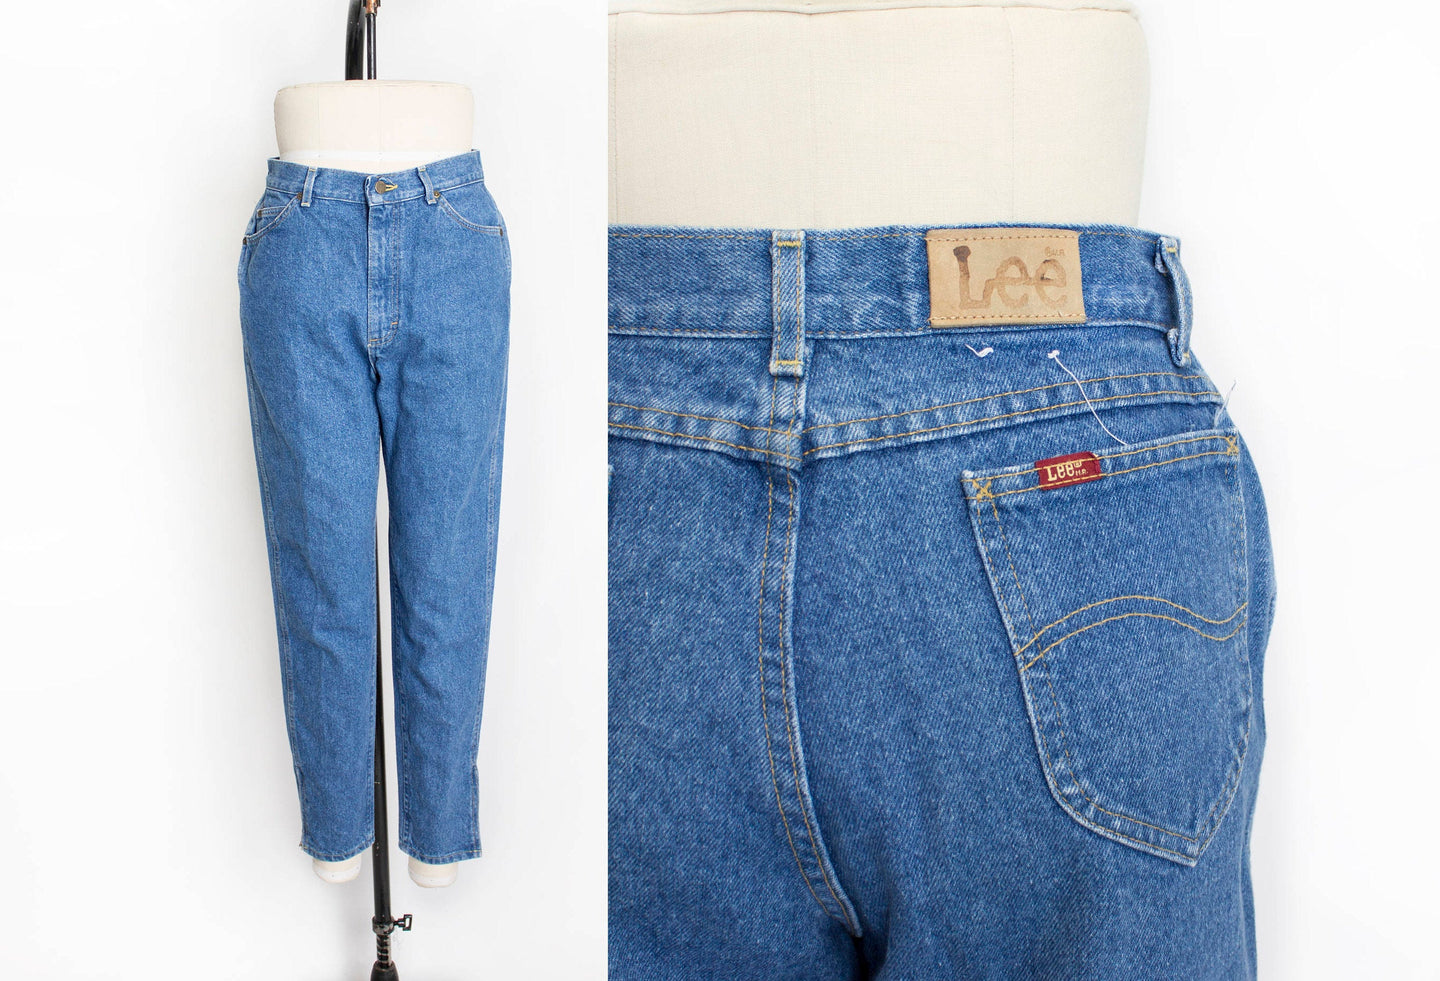 1990s Lee JEANS Cotton Denim High Waist Relaxed Fit Zip Up